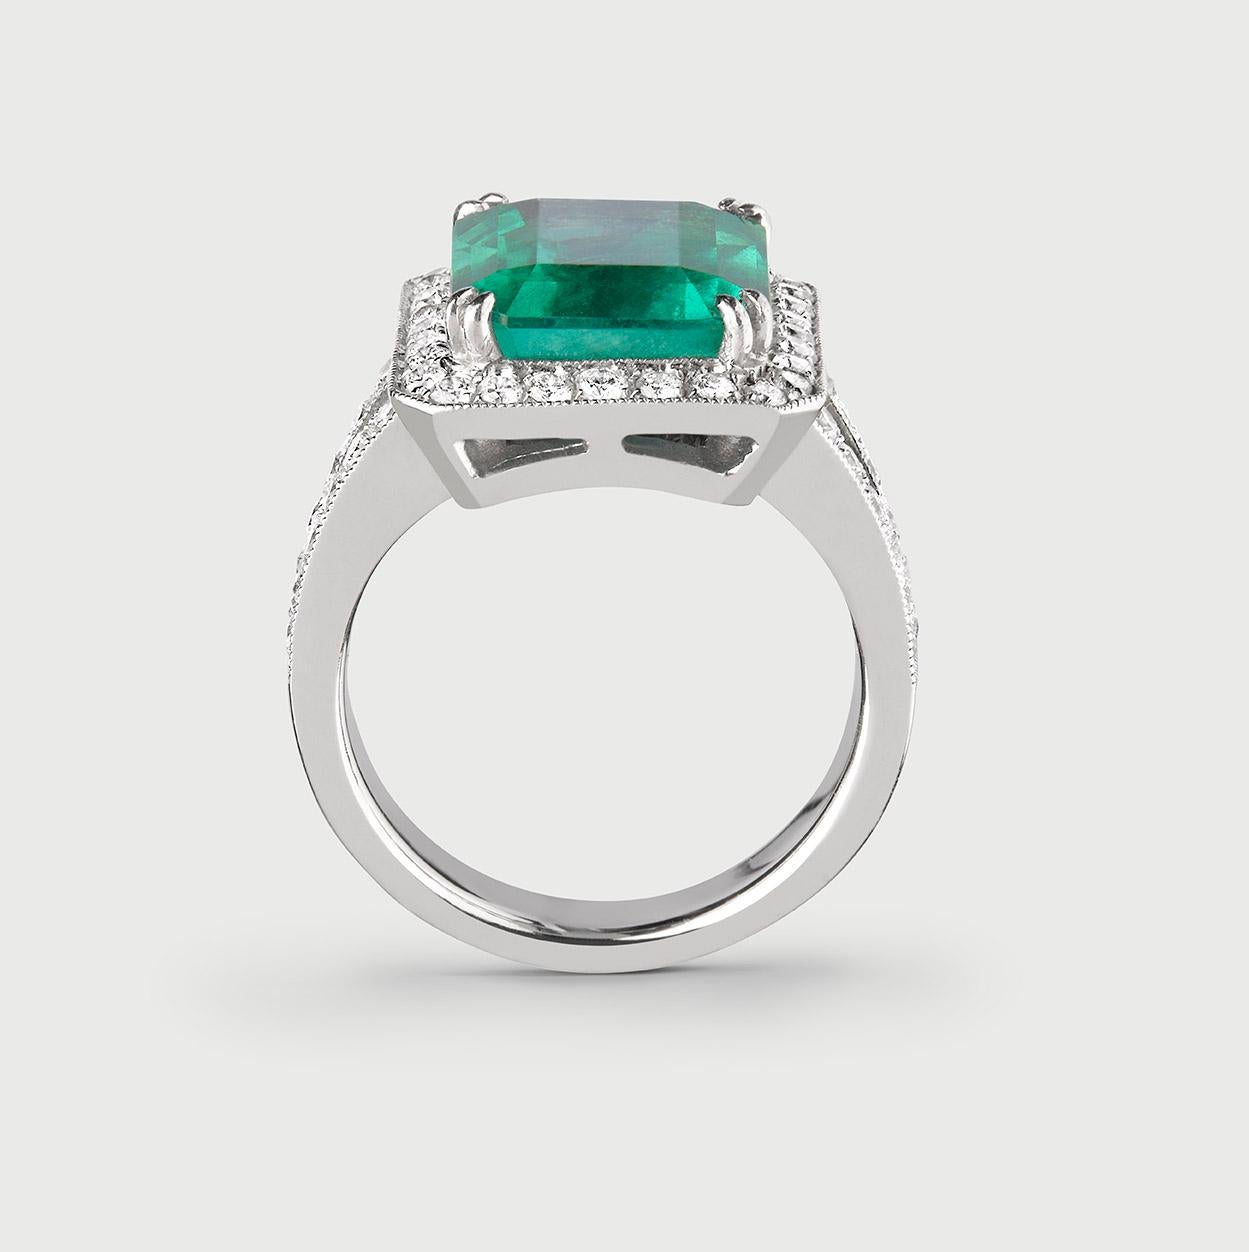 Emerald Cut 6 Carats Colombian Emerald & Diamond Cocktail Ring Handcrafted in 18k White Gold For Sale